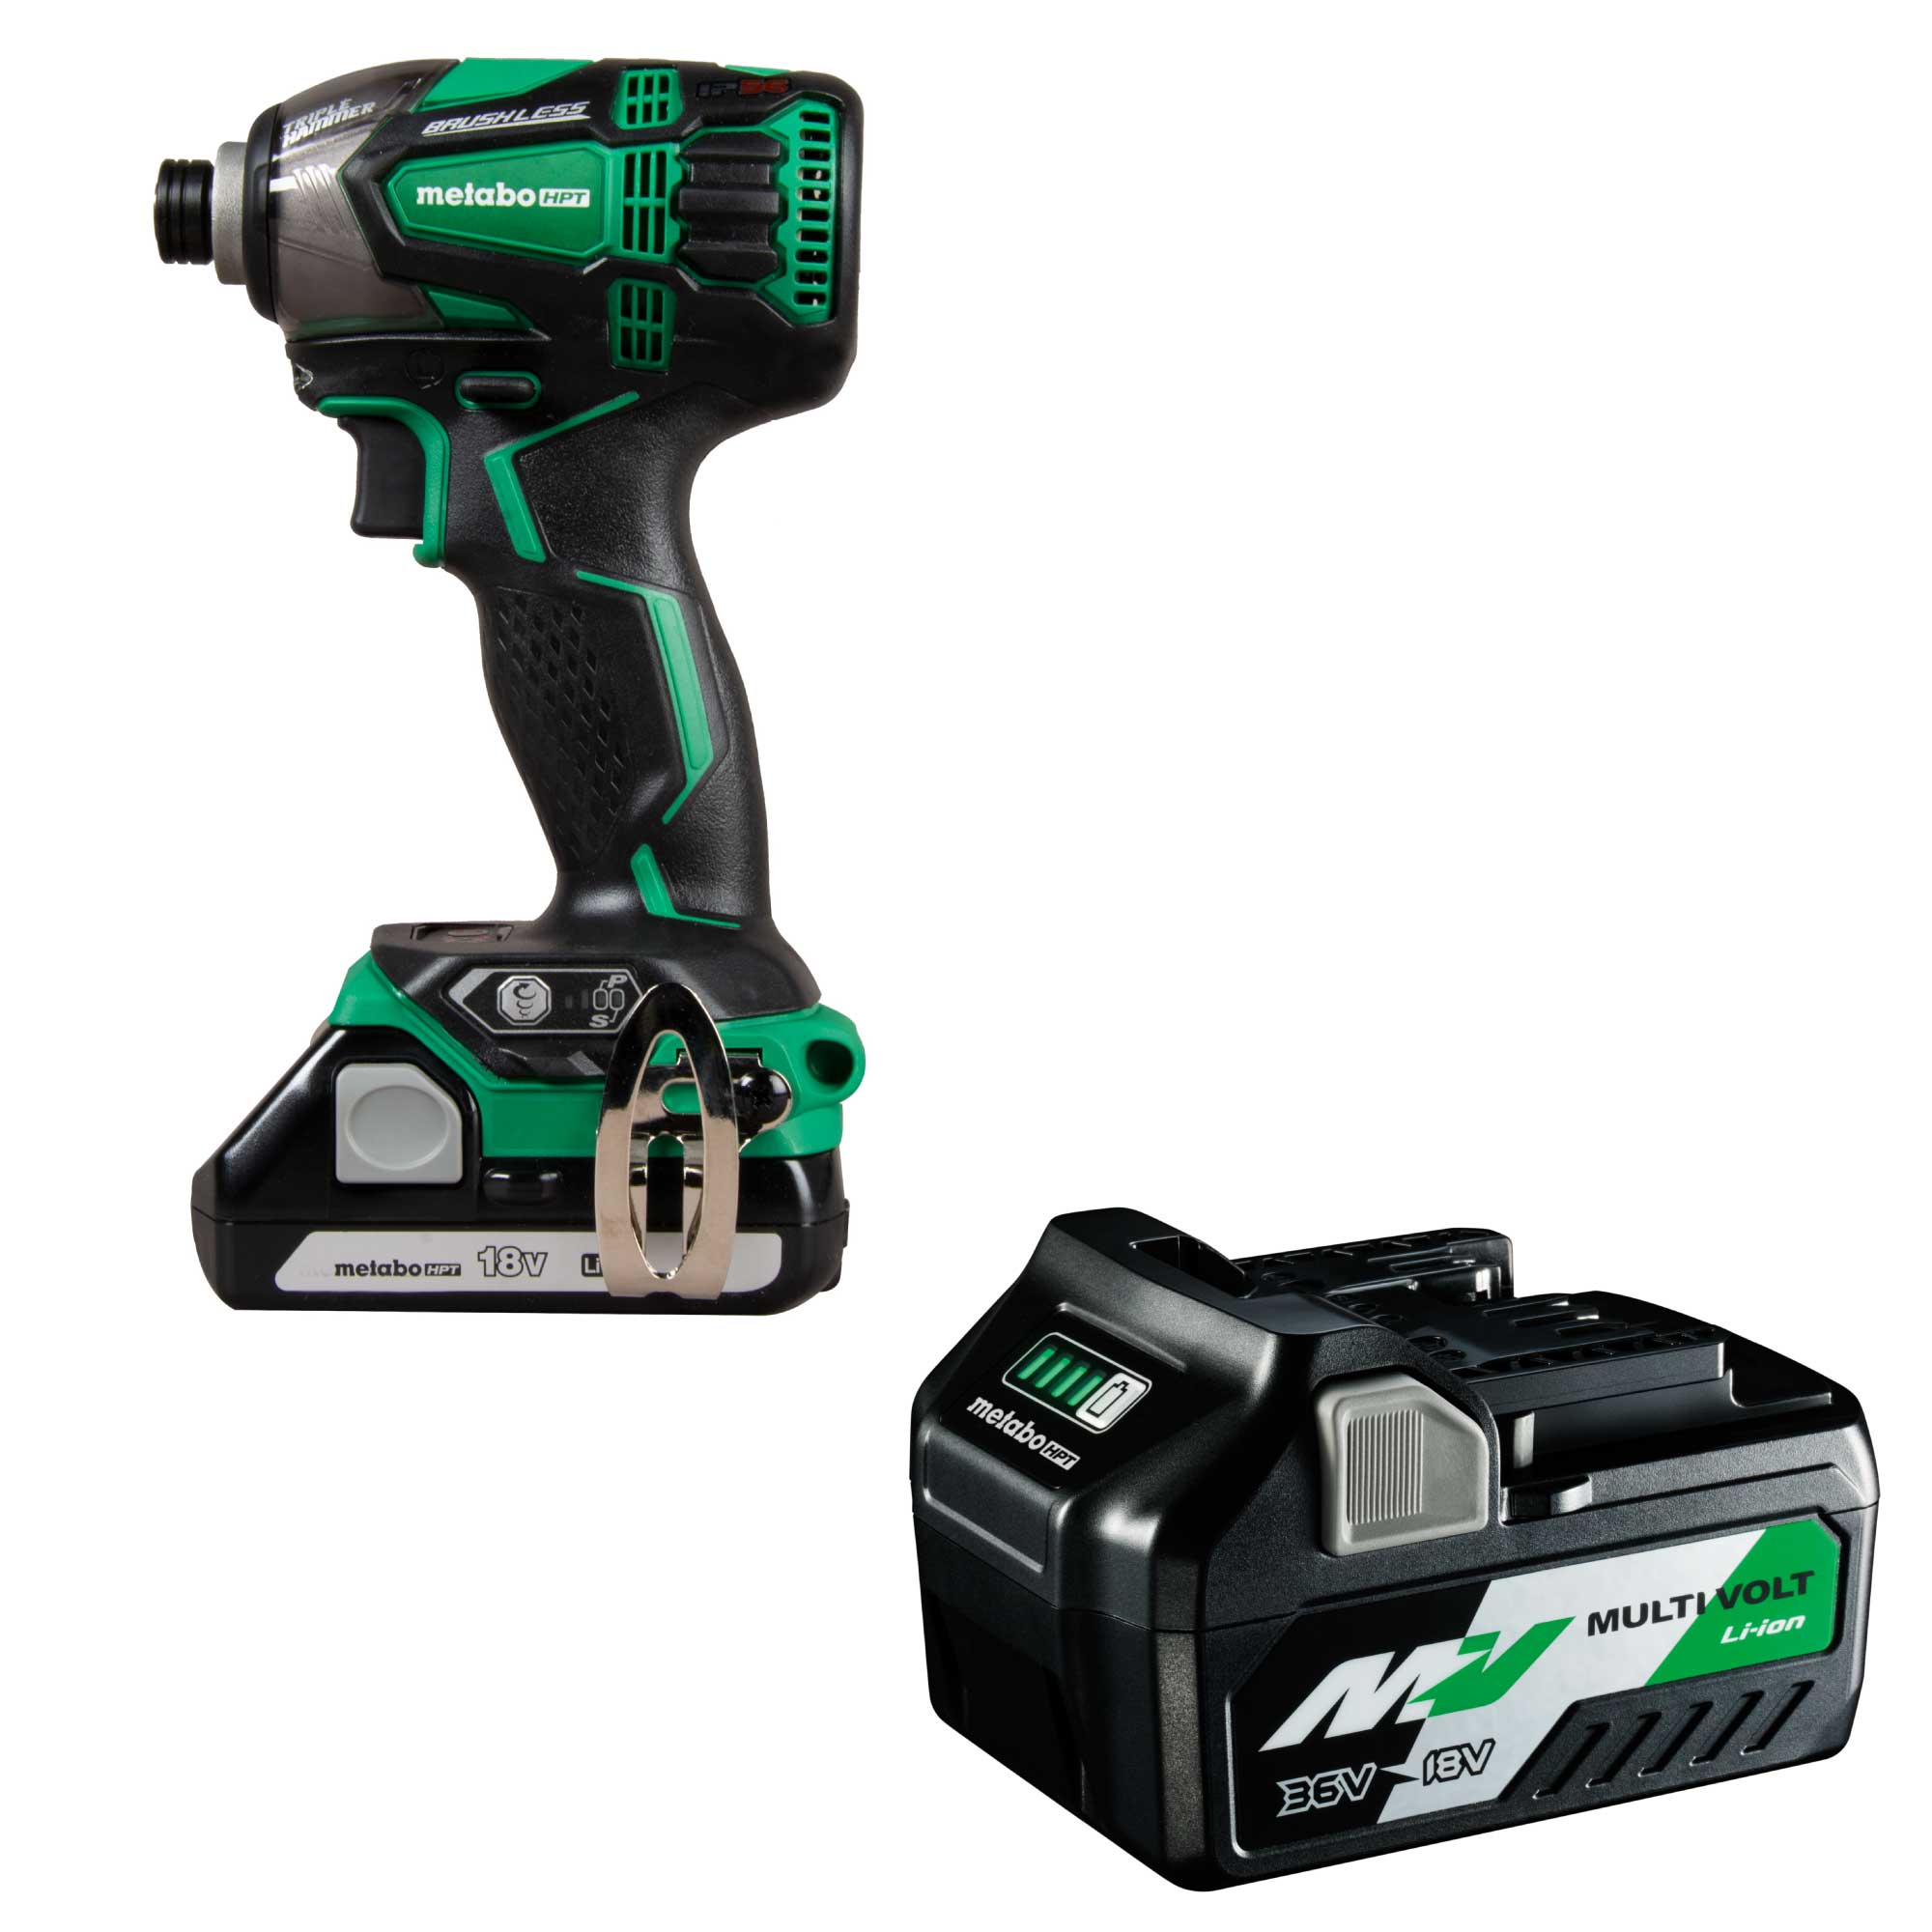 Metabo HPT MultiVolt 18-volt 1/4-in Variable Speed Brushless Cordless Impact Driver (2-batteries included) with MultiVolt 2.5Ah/5.0Ah Power Tool